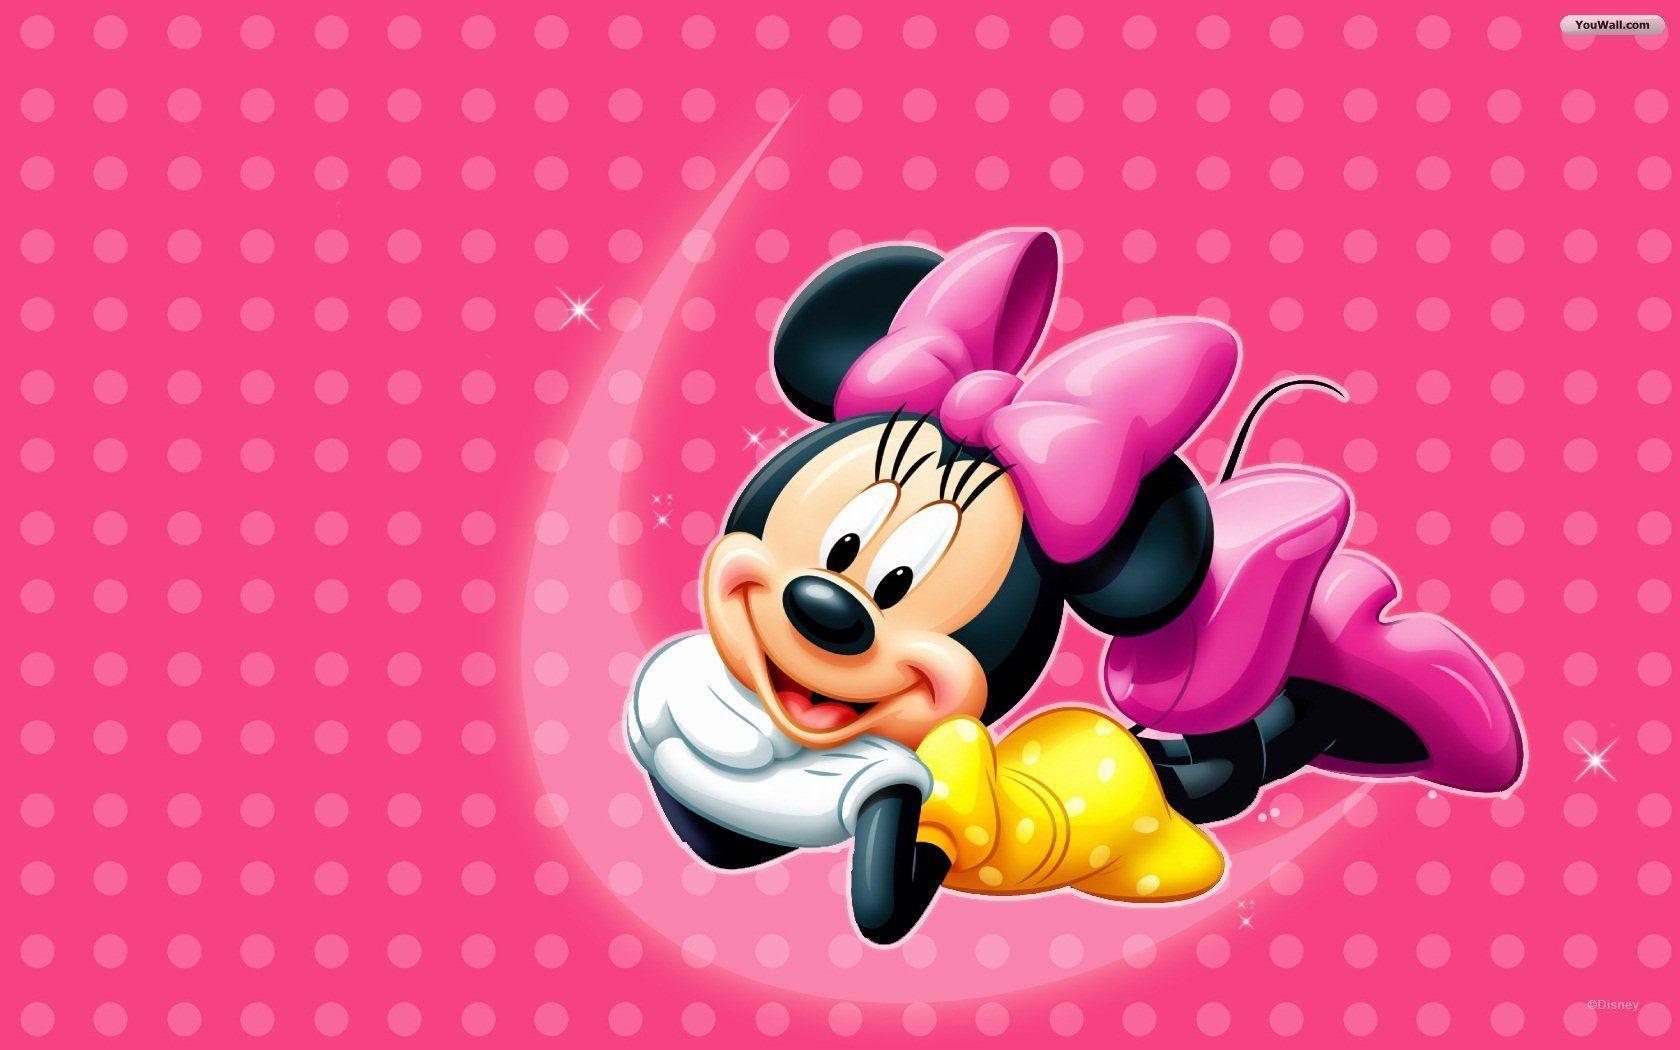 Minnie Mouse Wallpapers Wallpaper Cave HD Wallpapers Download Free Images Wallpaper [wallpaper981.blogspot.com]